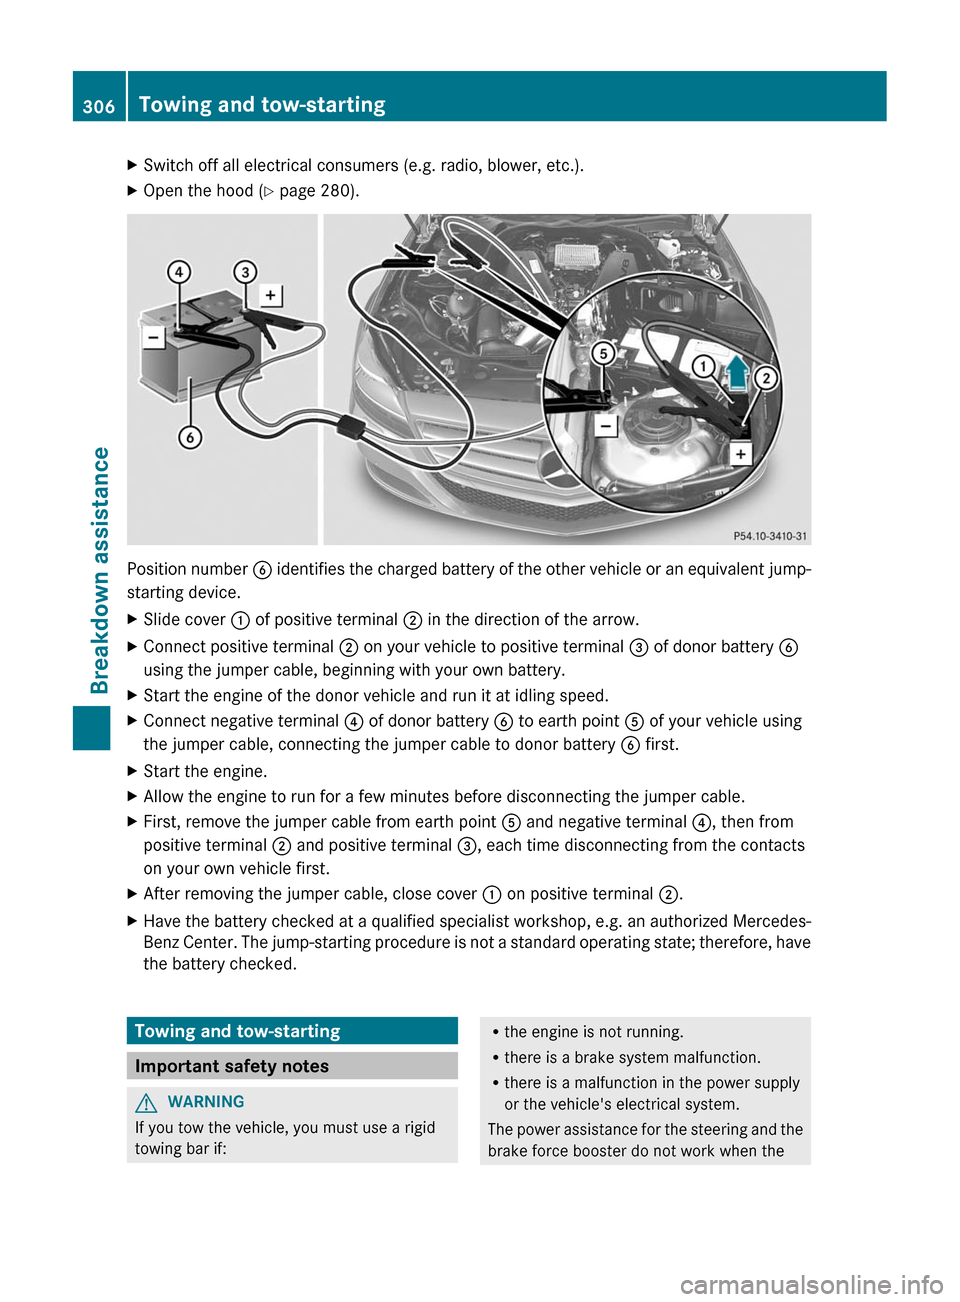 MERCEDES-BENZ CLS-Class 2012 W218 Service Manual XSwitch off all electrical consumers (e.g. radio, blower, etc.).XOpen the hood (Y page 280).
Position number  B identifies the charged battery of the other vehicle or an equivalent jump-
starting devi